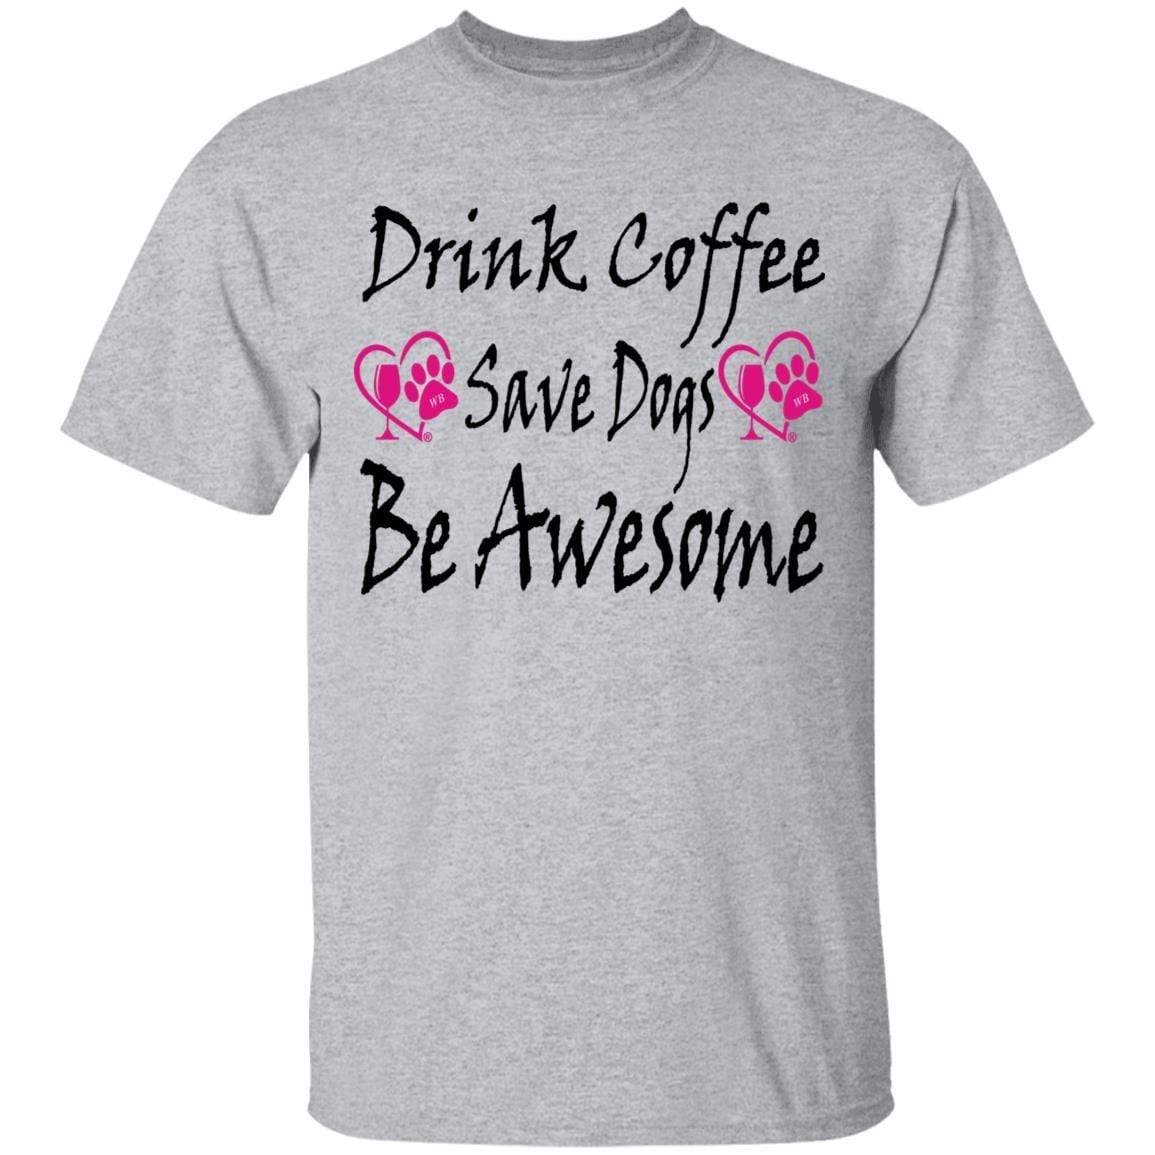 T-Shirts Sport Grey / S Winey Bitches Co "Drink Coffee Save Dogs Be Awesome" 5.3 oz. T-Shirt WineyBitchesCo